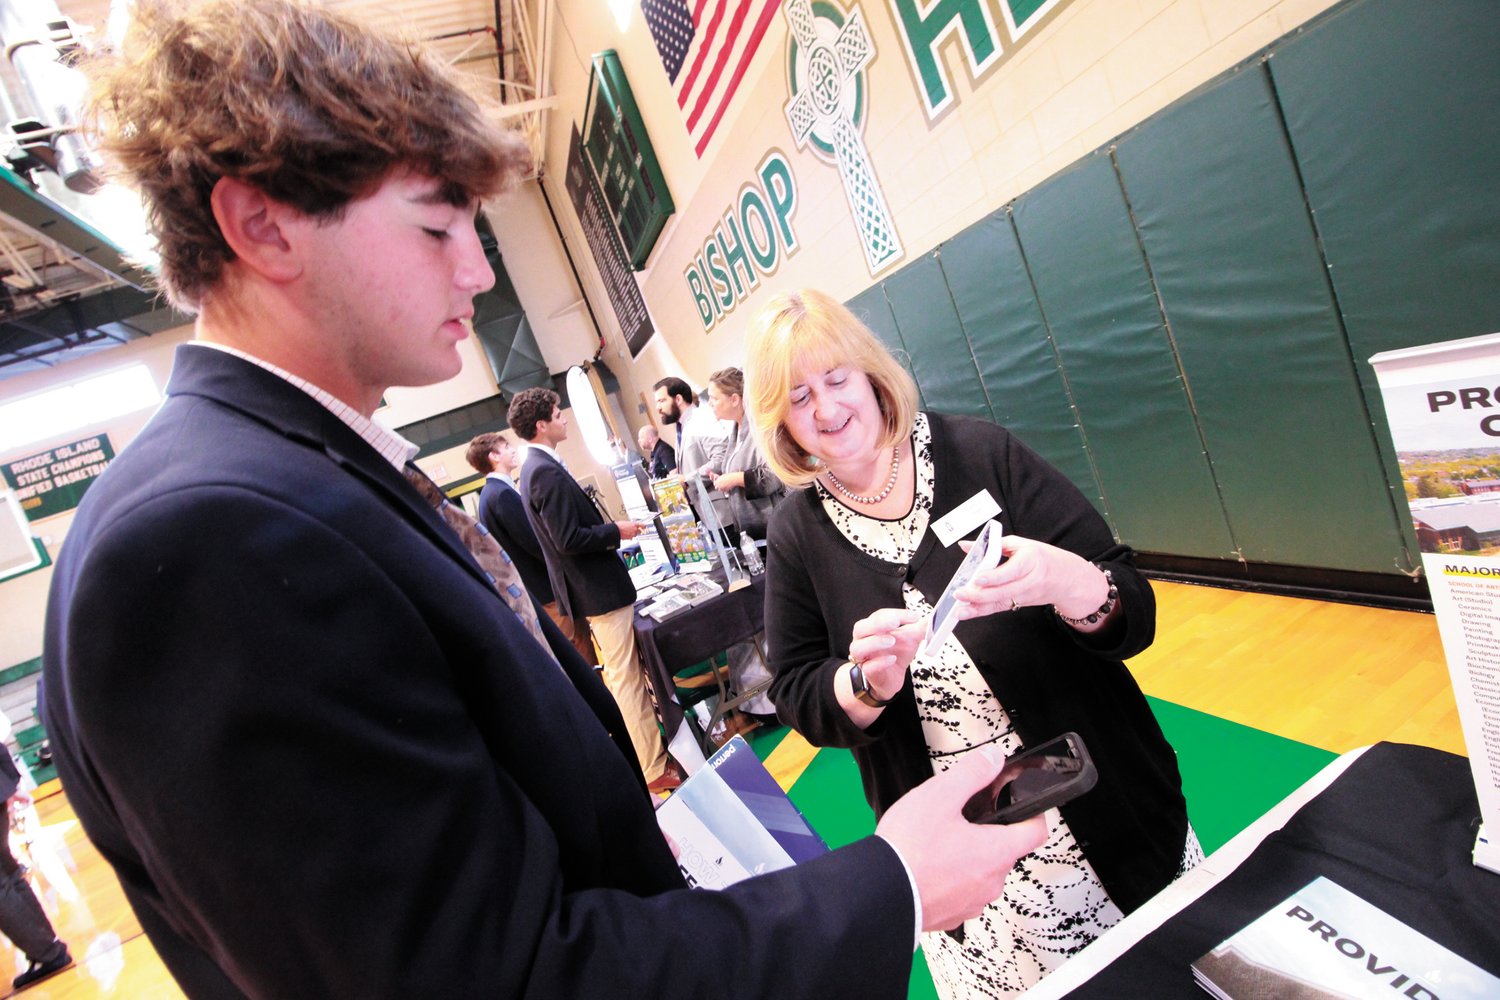 LESS FORMS, MORE TIME TO TALK: Nancy Eagan of Providence College traded information with students using her and their cell phones with the app StriveScan. The system allowed for college representatives and students to spend more time talking in place of completing forms.